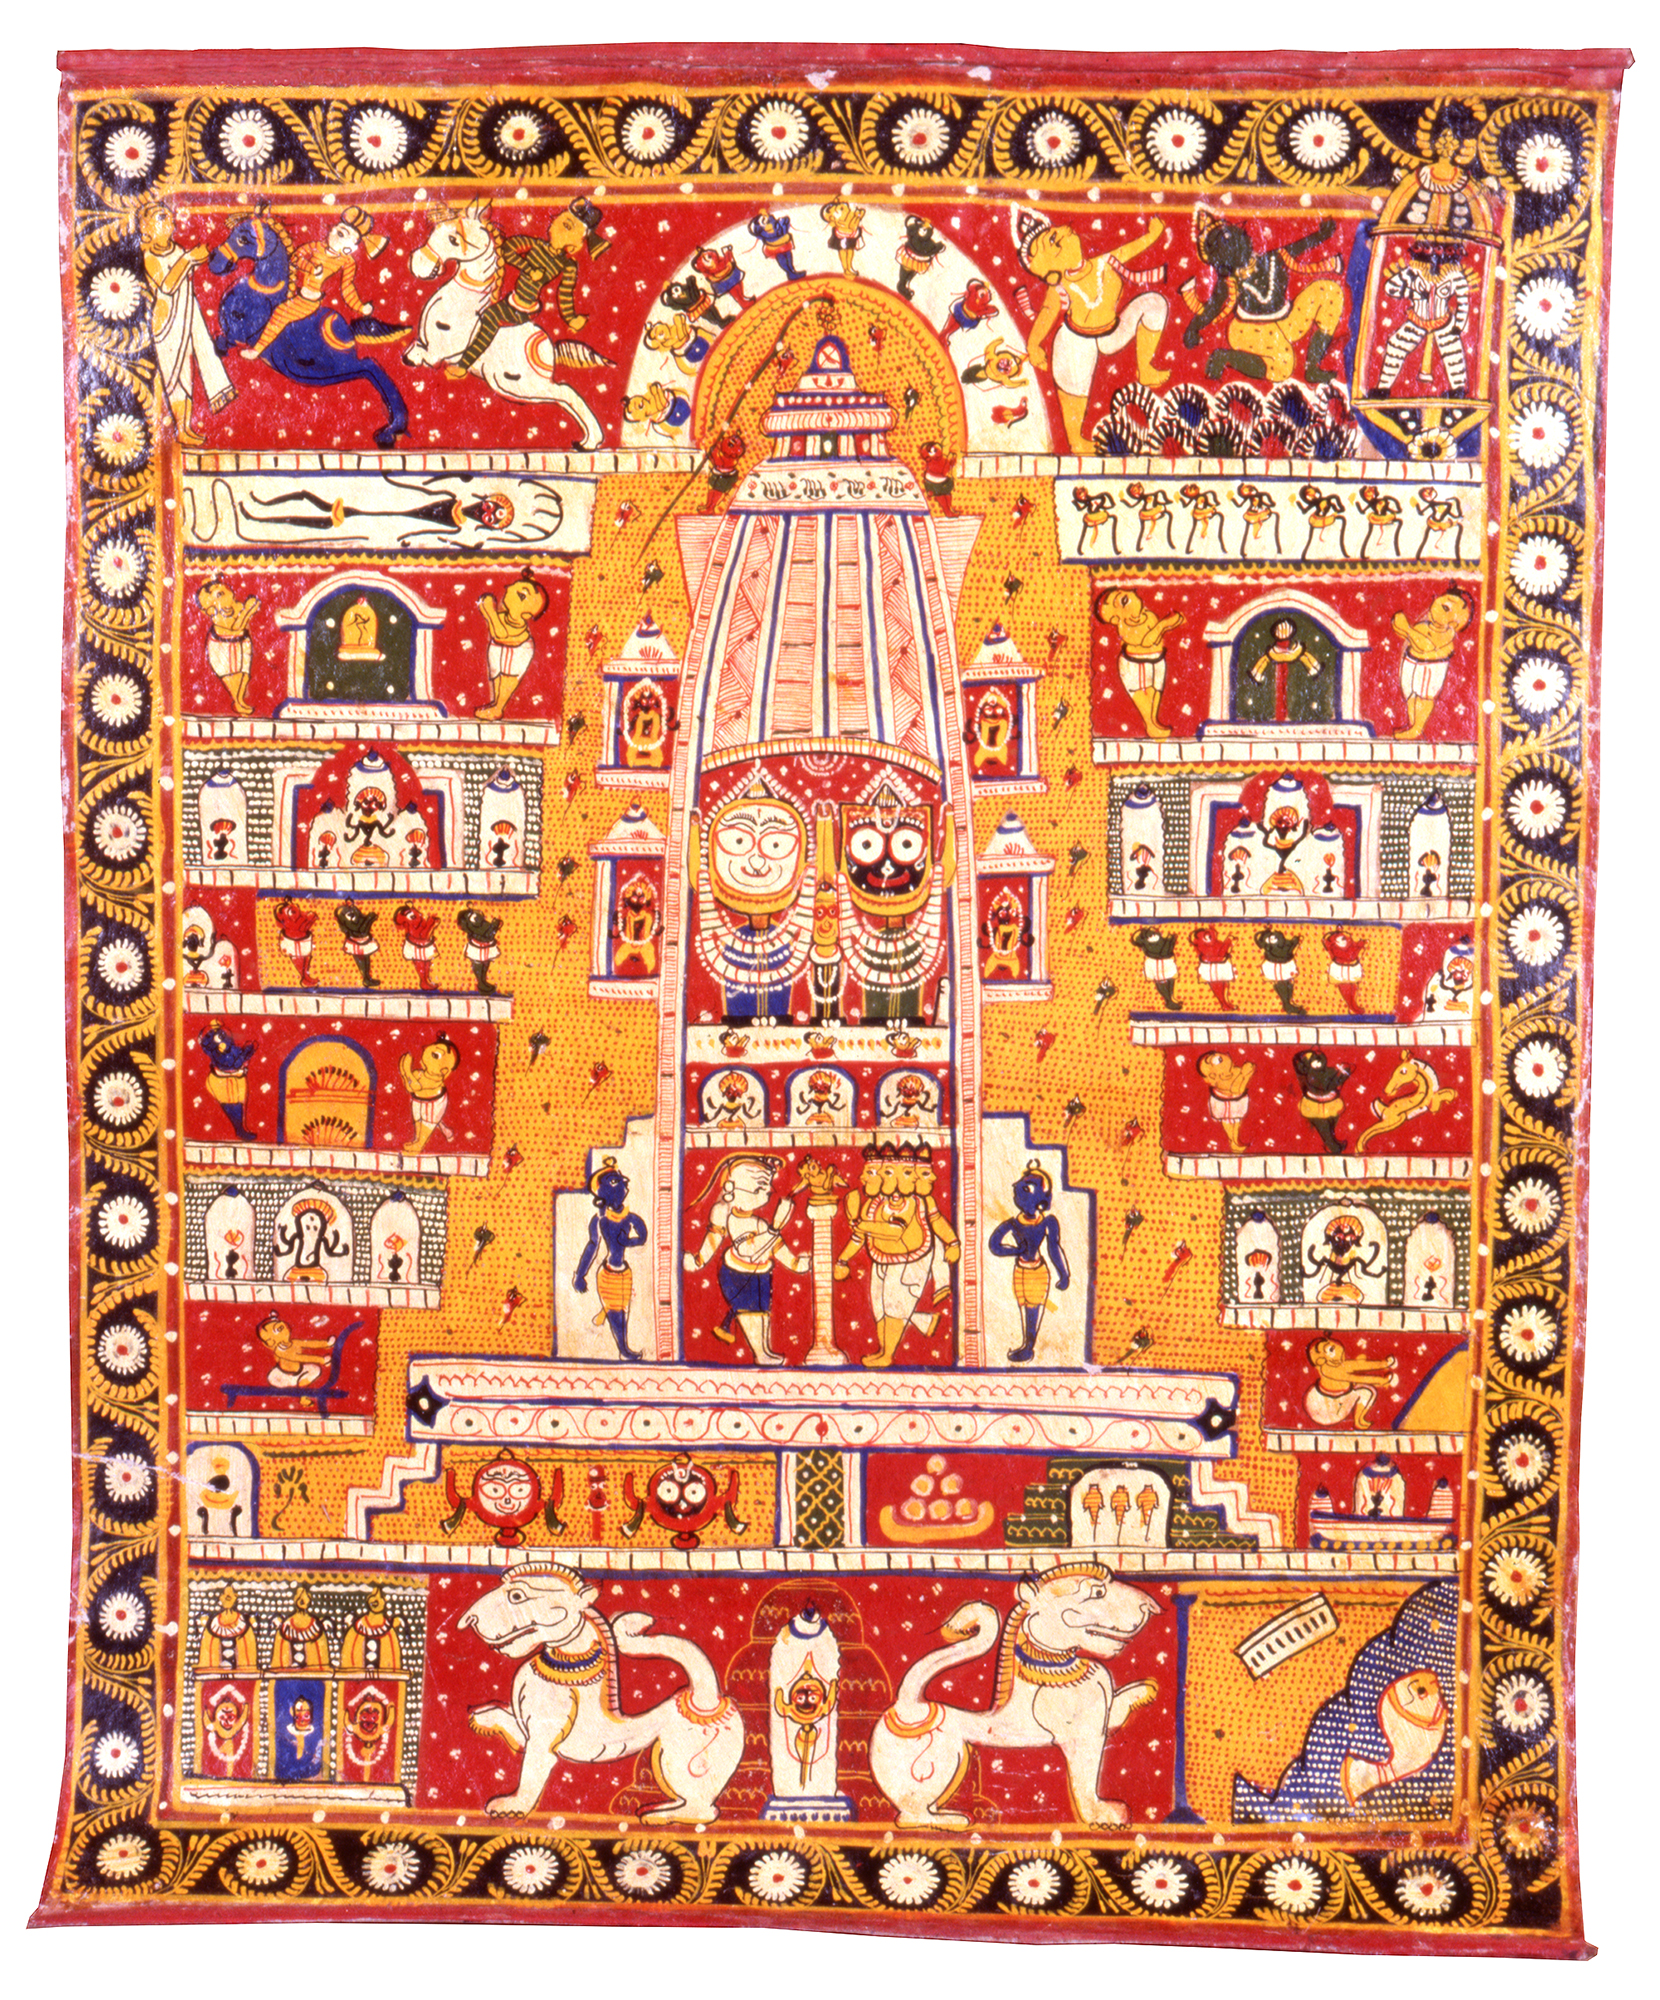 Painting showing multiple figures, with white, red, blue, yellow and black skin, depicted inside red and yellow buildings 